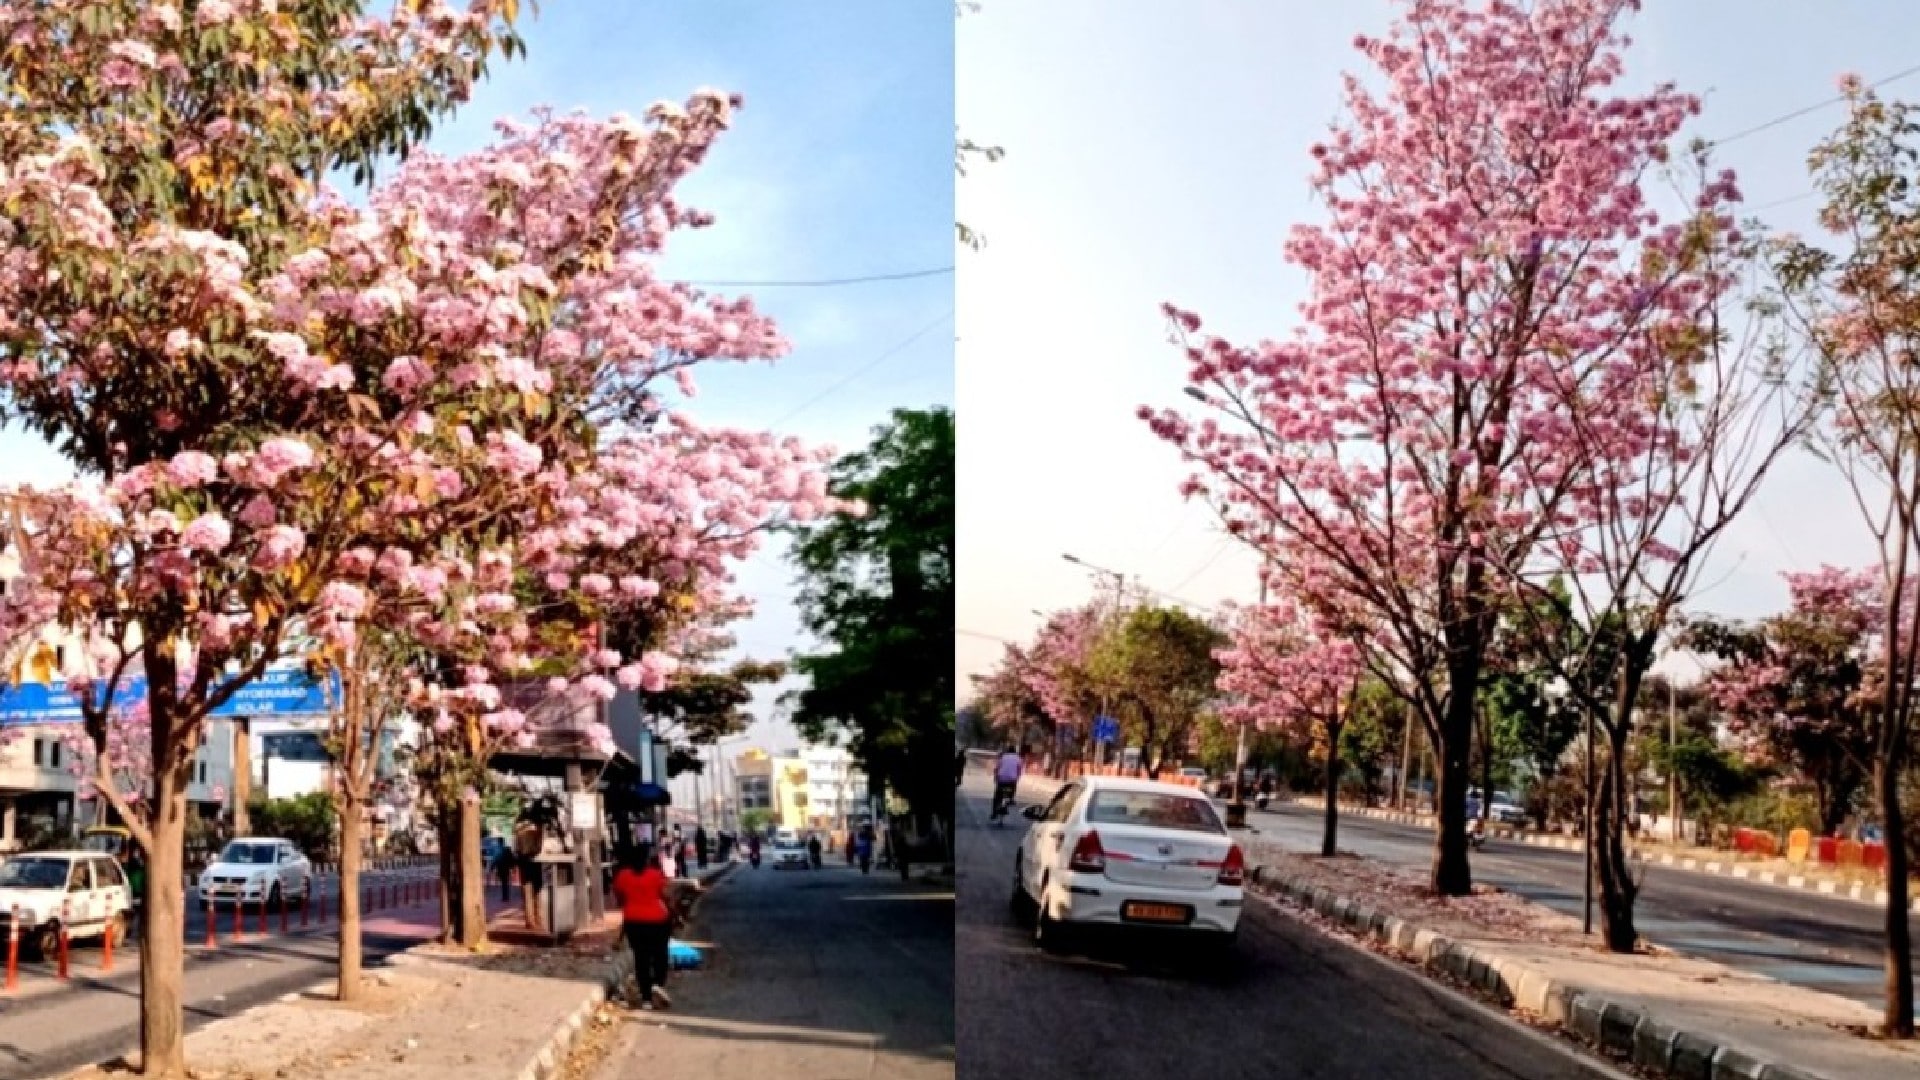 Bengaluru Is Hot Pink Right Now